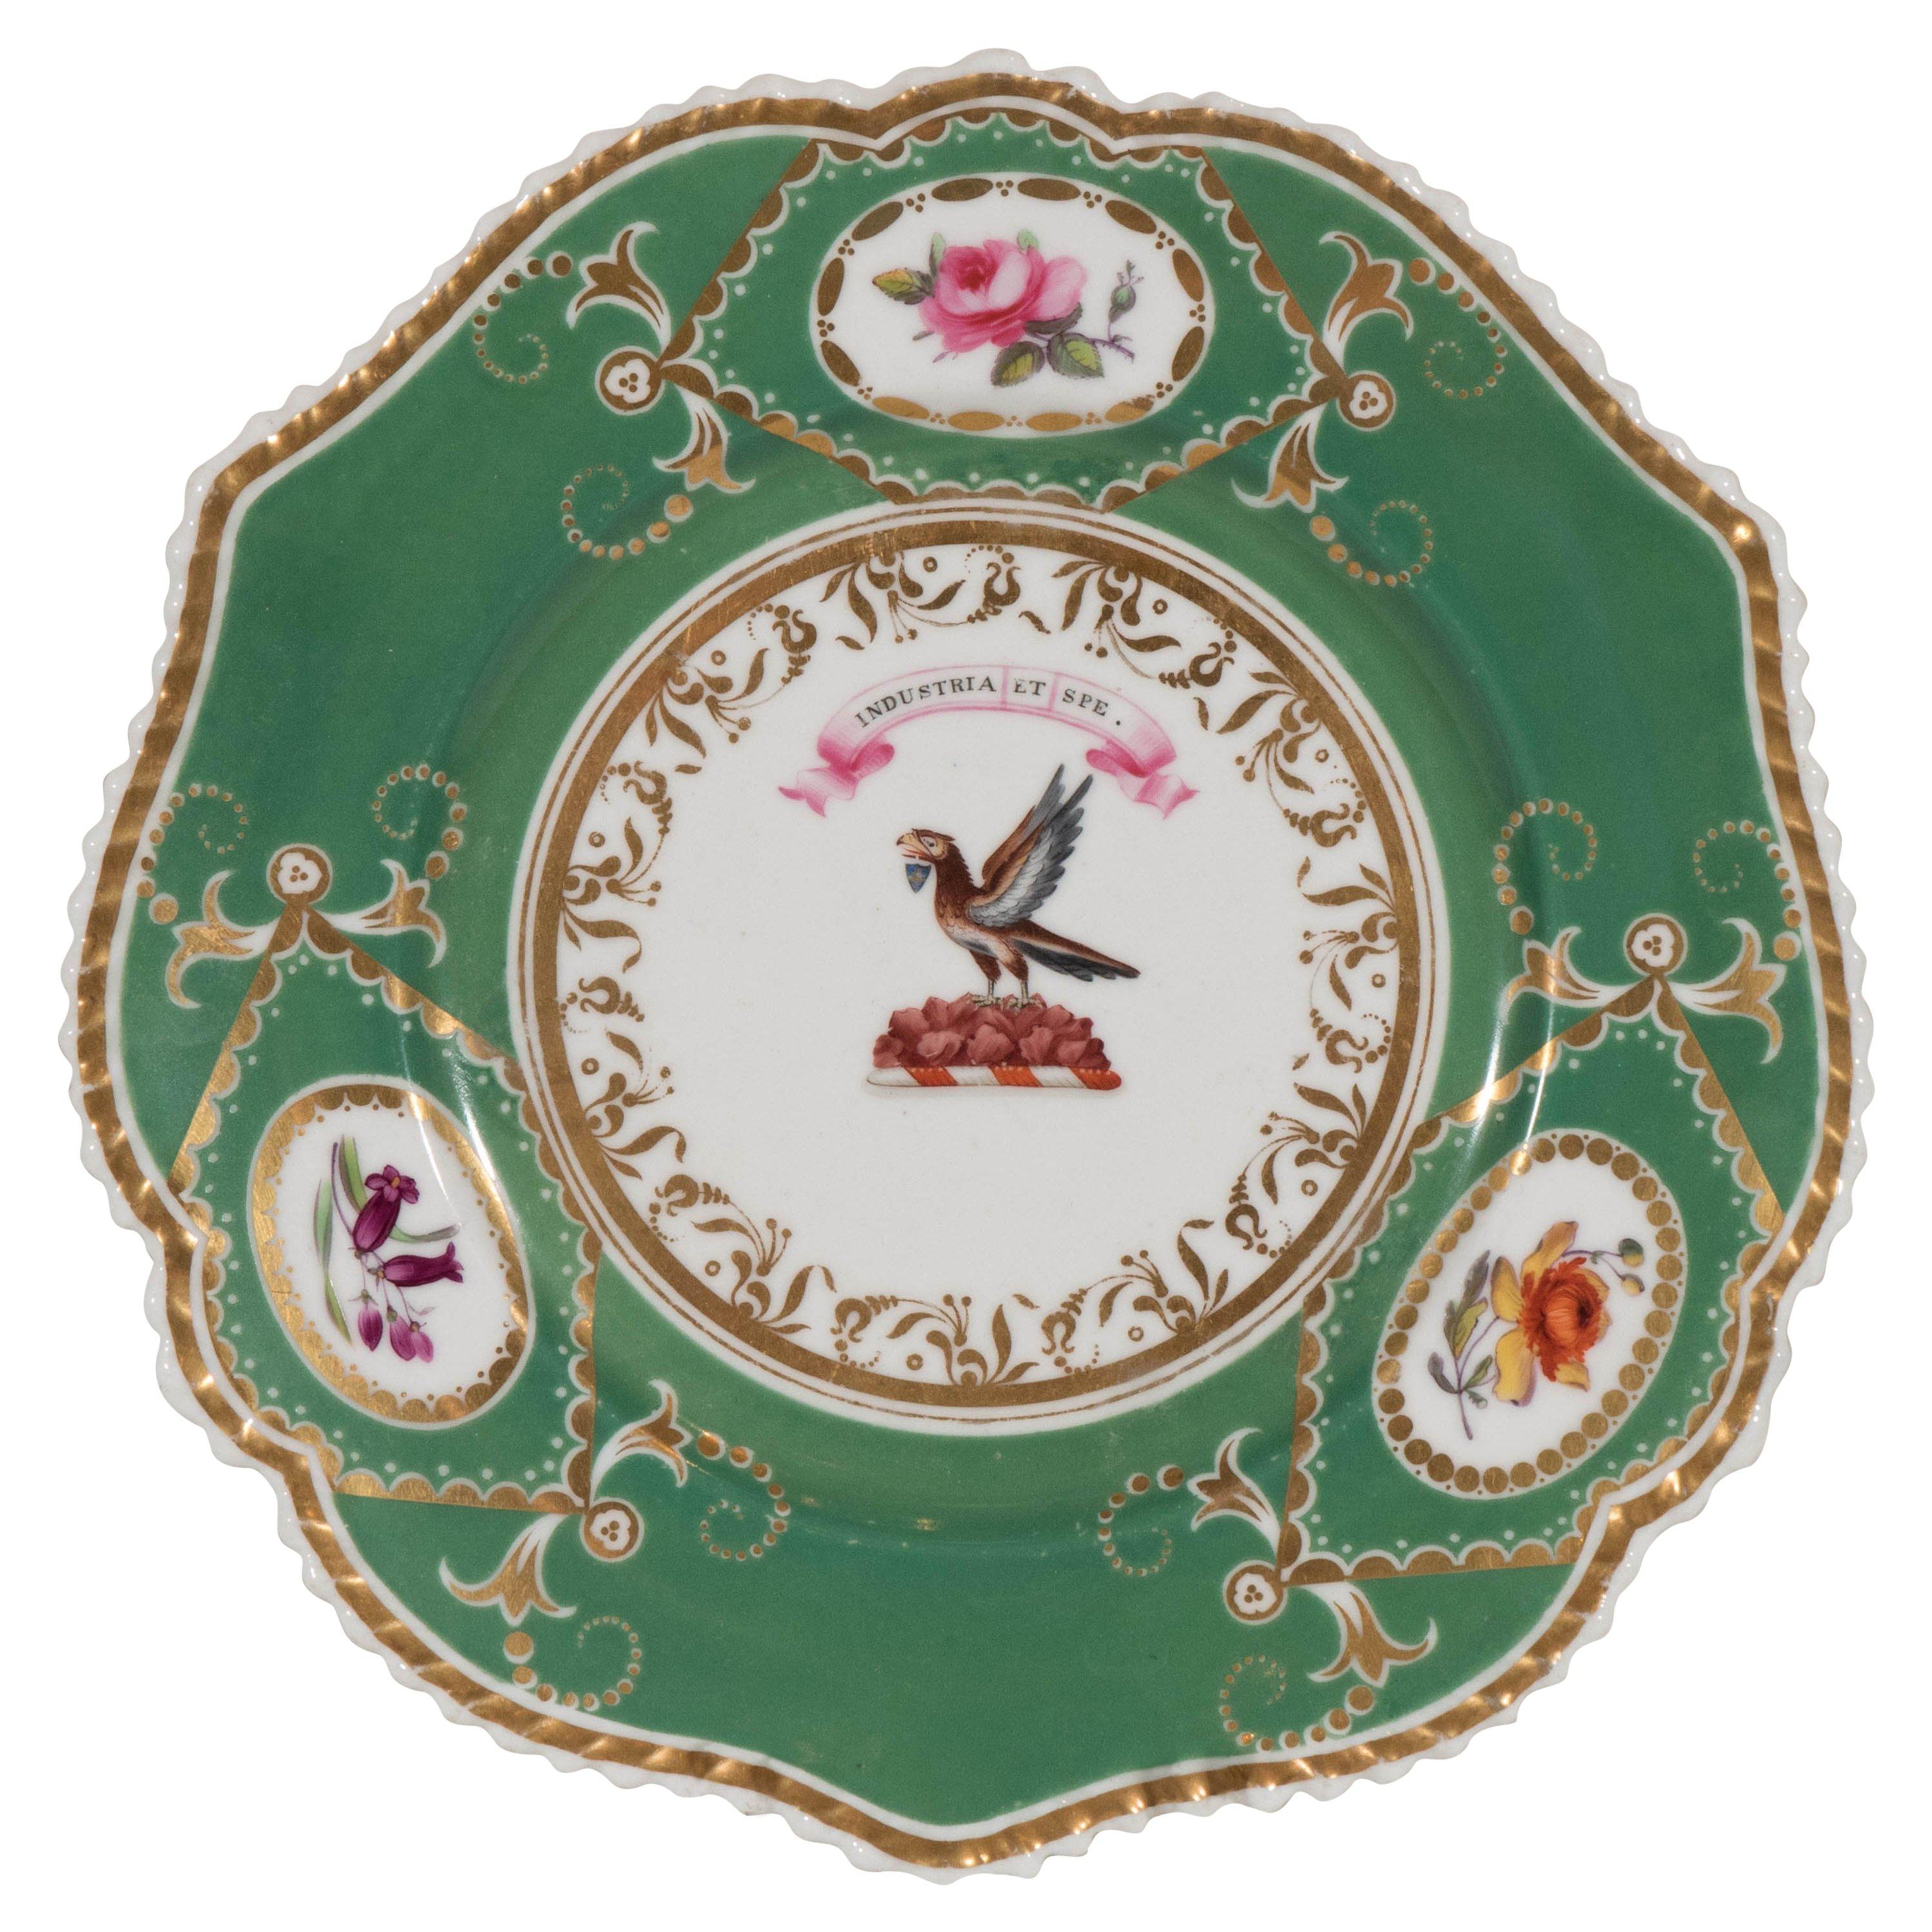  English Porcelain Armorial Plate Hand Painted Eagle Motto By Industry and Hope For Sale